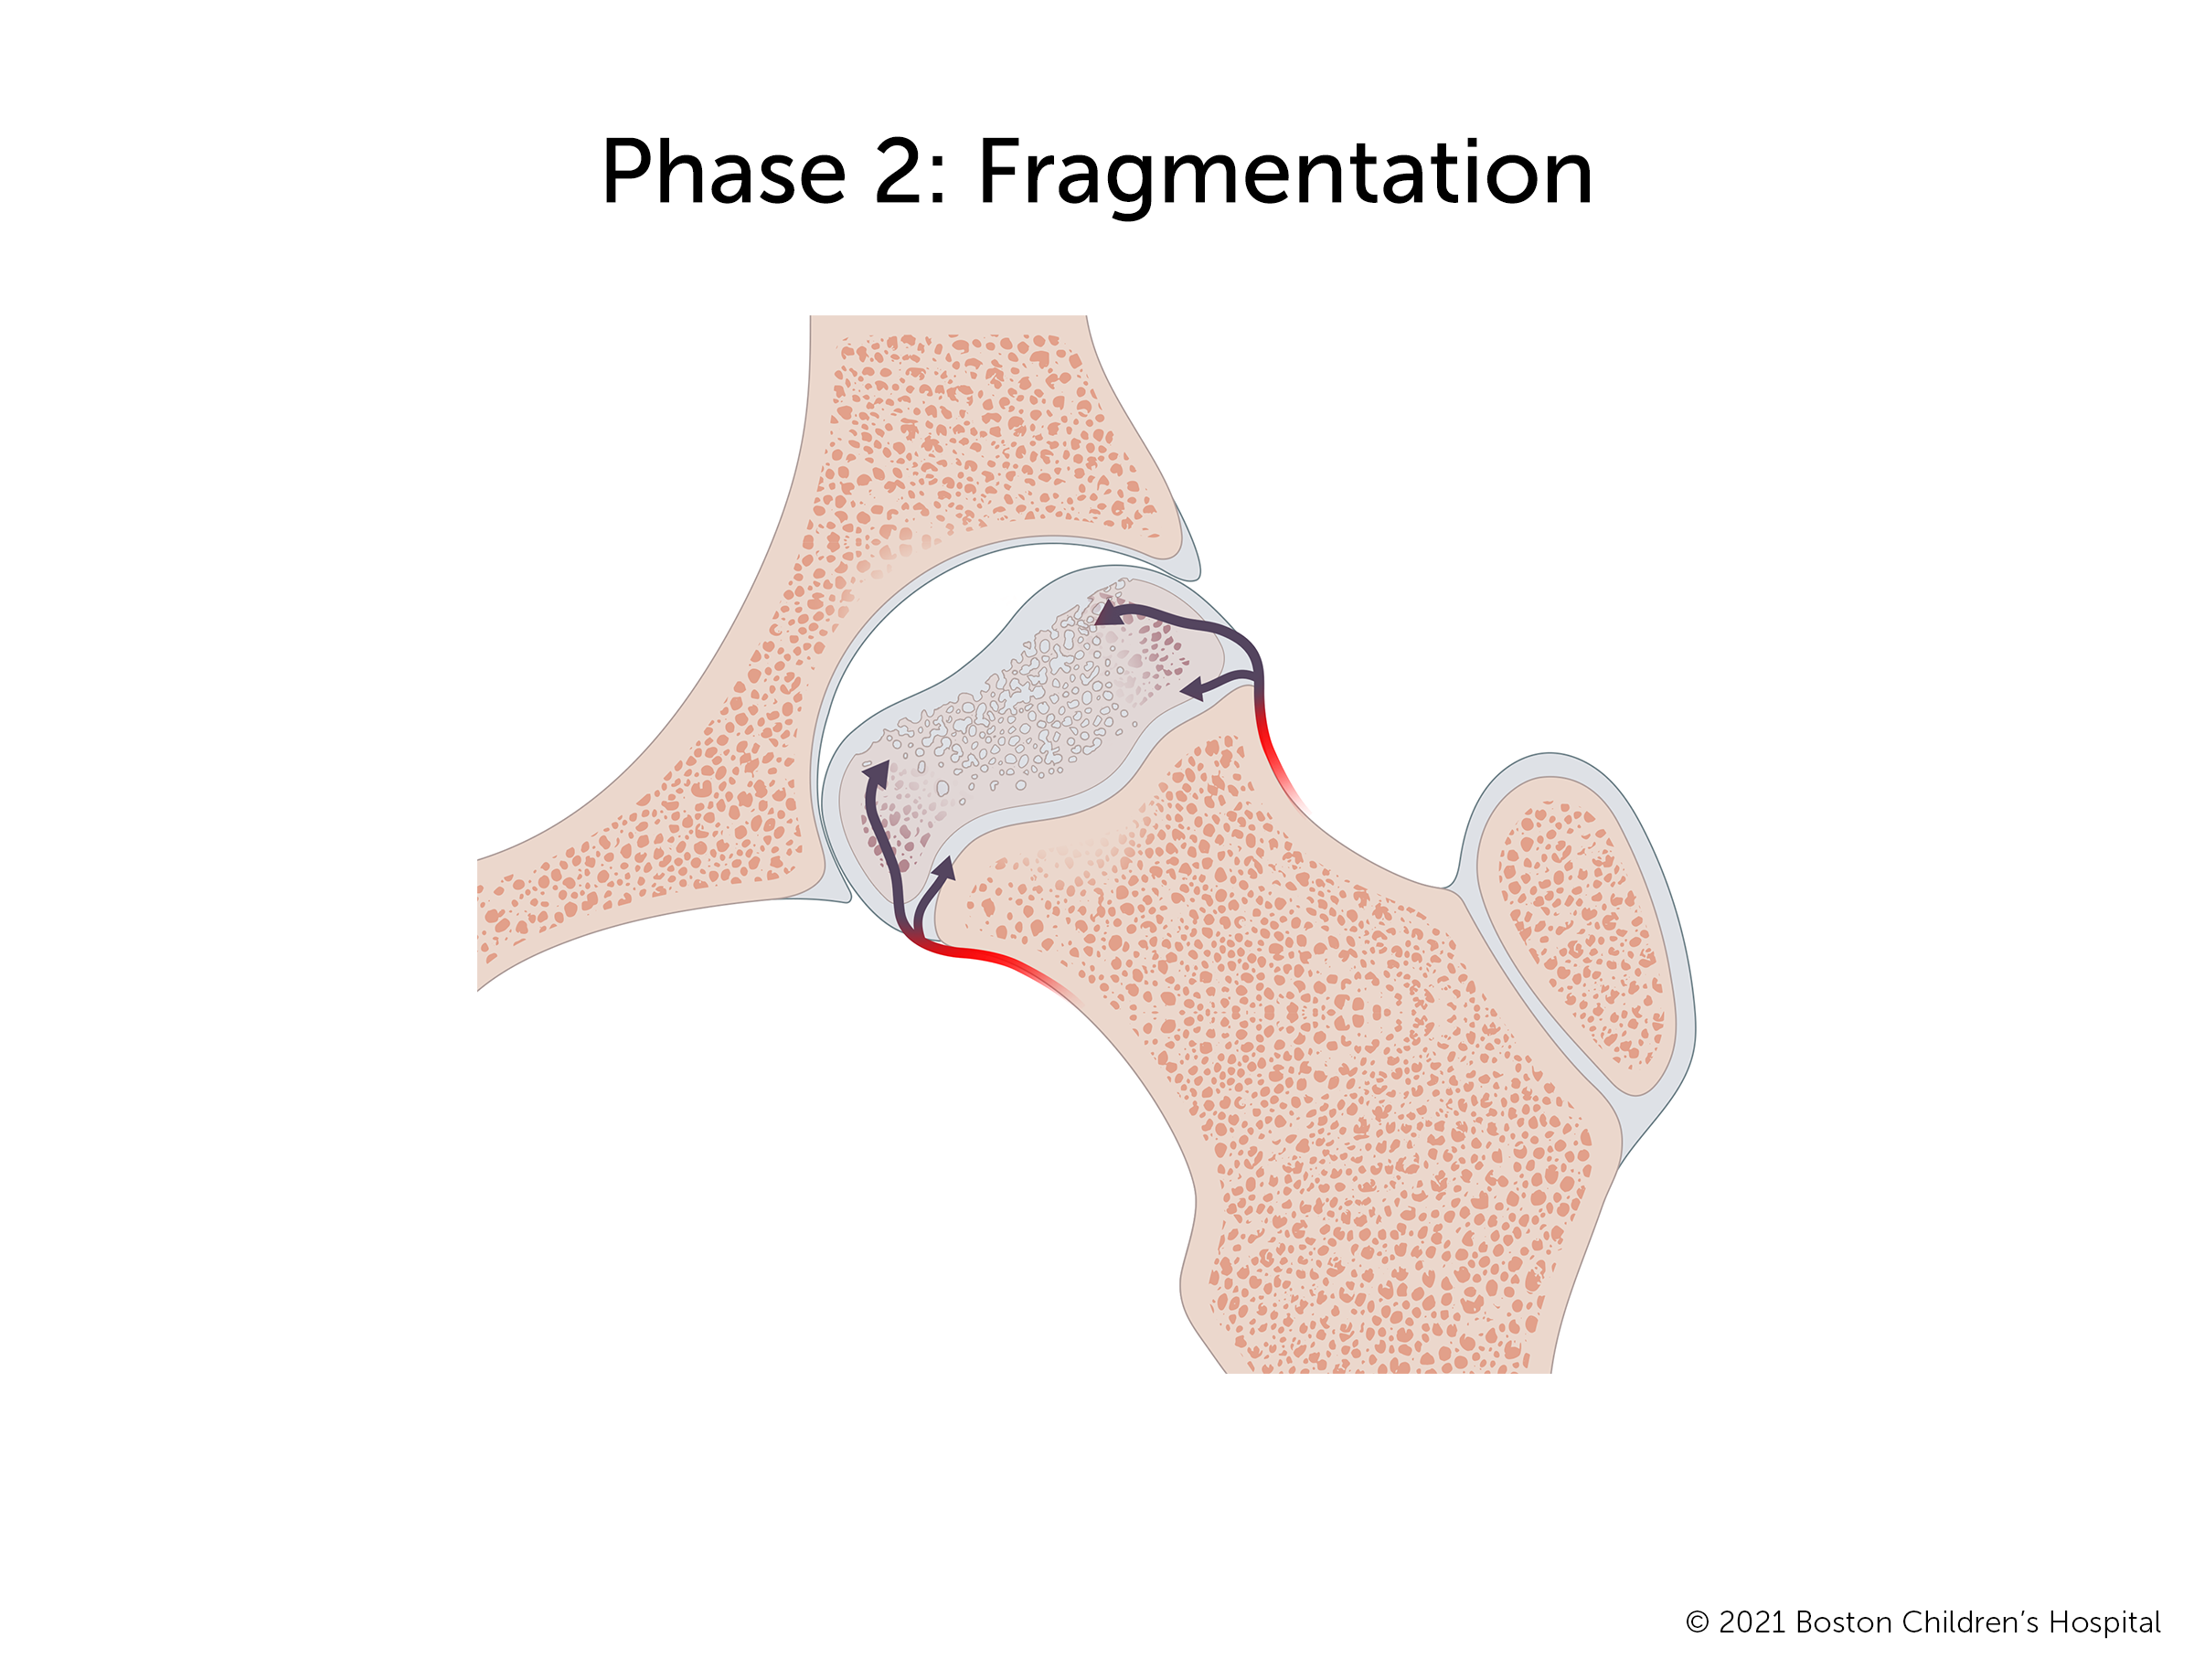 Phase 2: Fragmentation. As the interrupted blood flow continues, the pocket in the hip socket grows larger.